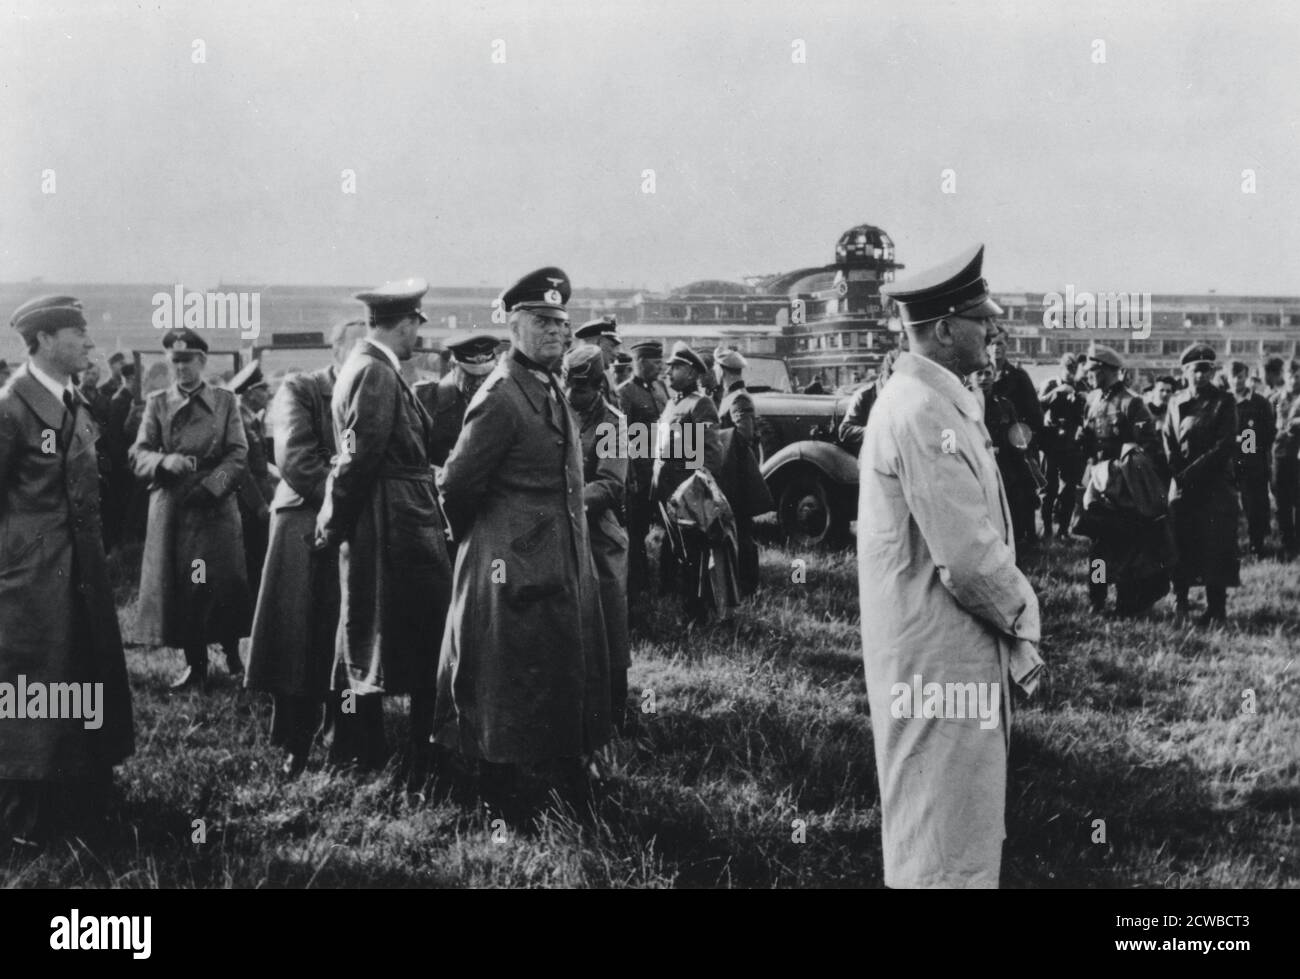 Adolf Hitler inspecting the captured Le Bourget airfield, Paris, France, 23 June 1940. Hitler's senior general, Wilhelm Keitel, is pictured behind him. The photographer is unknown. Stock Photo